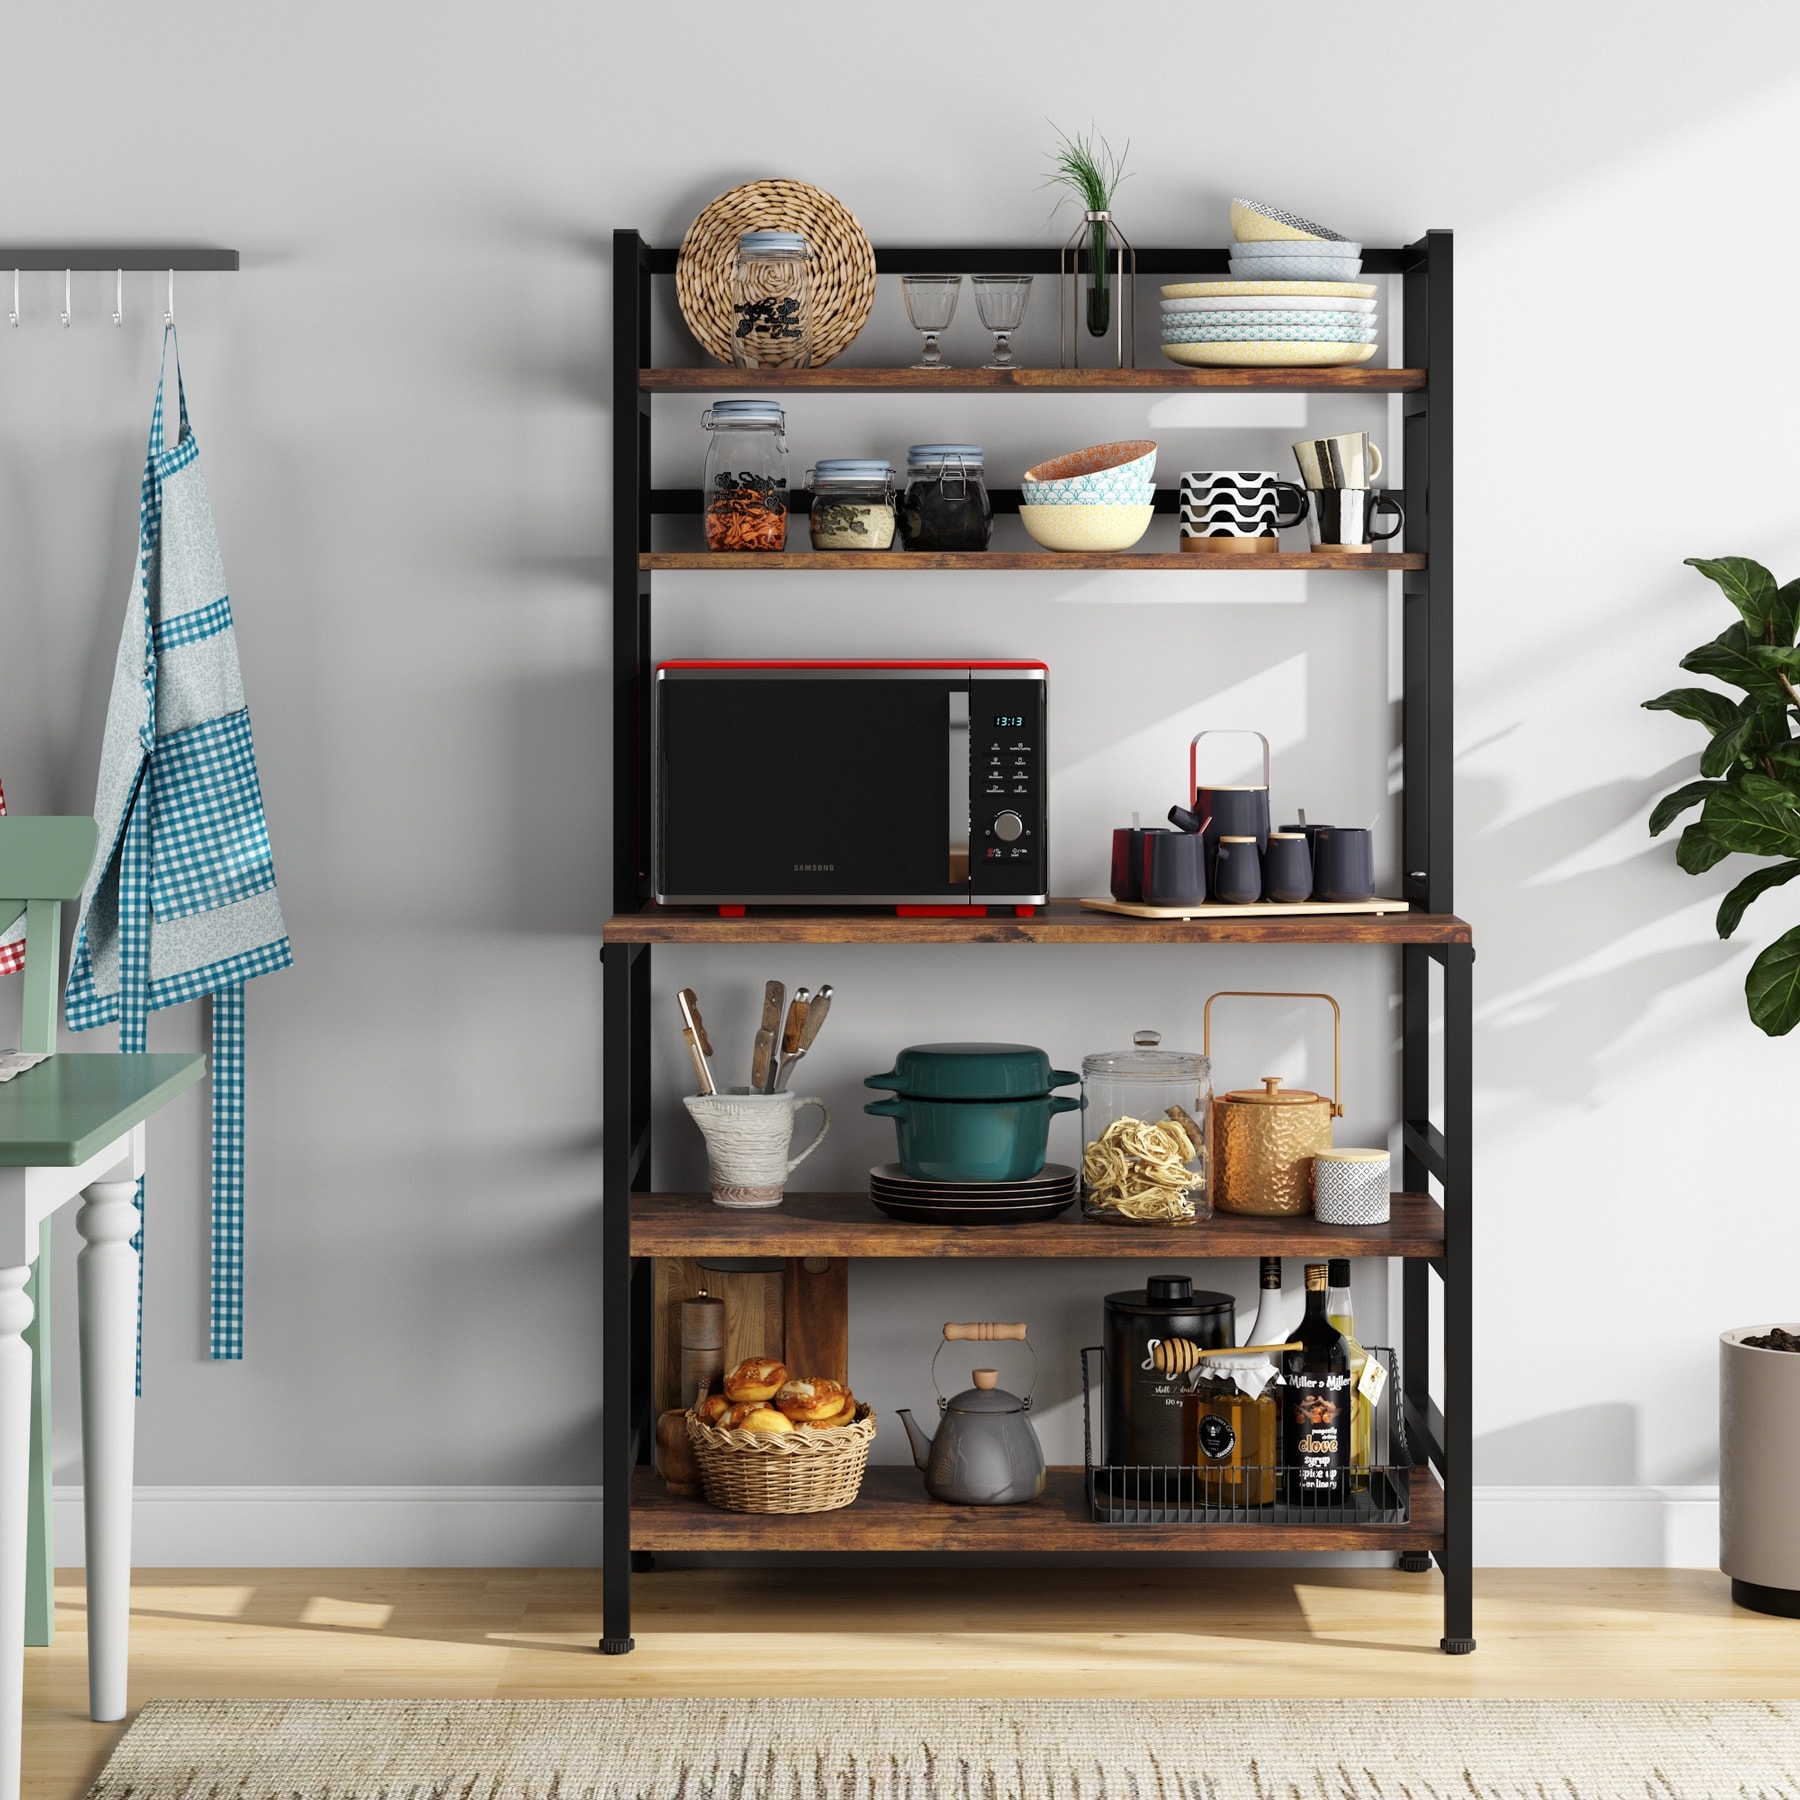 80x40x170cm Wood and Metal Frame Rustic Brown Microwave Oven Stand Utility Home Office Rack HOMECHO 5-Tier Kitchen Bakers Rack Tall Storage Shelf with Hutch Easy Assembly 